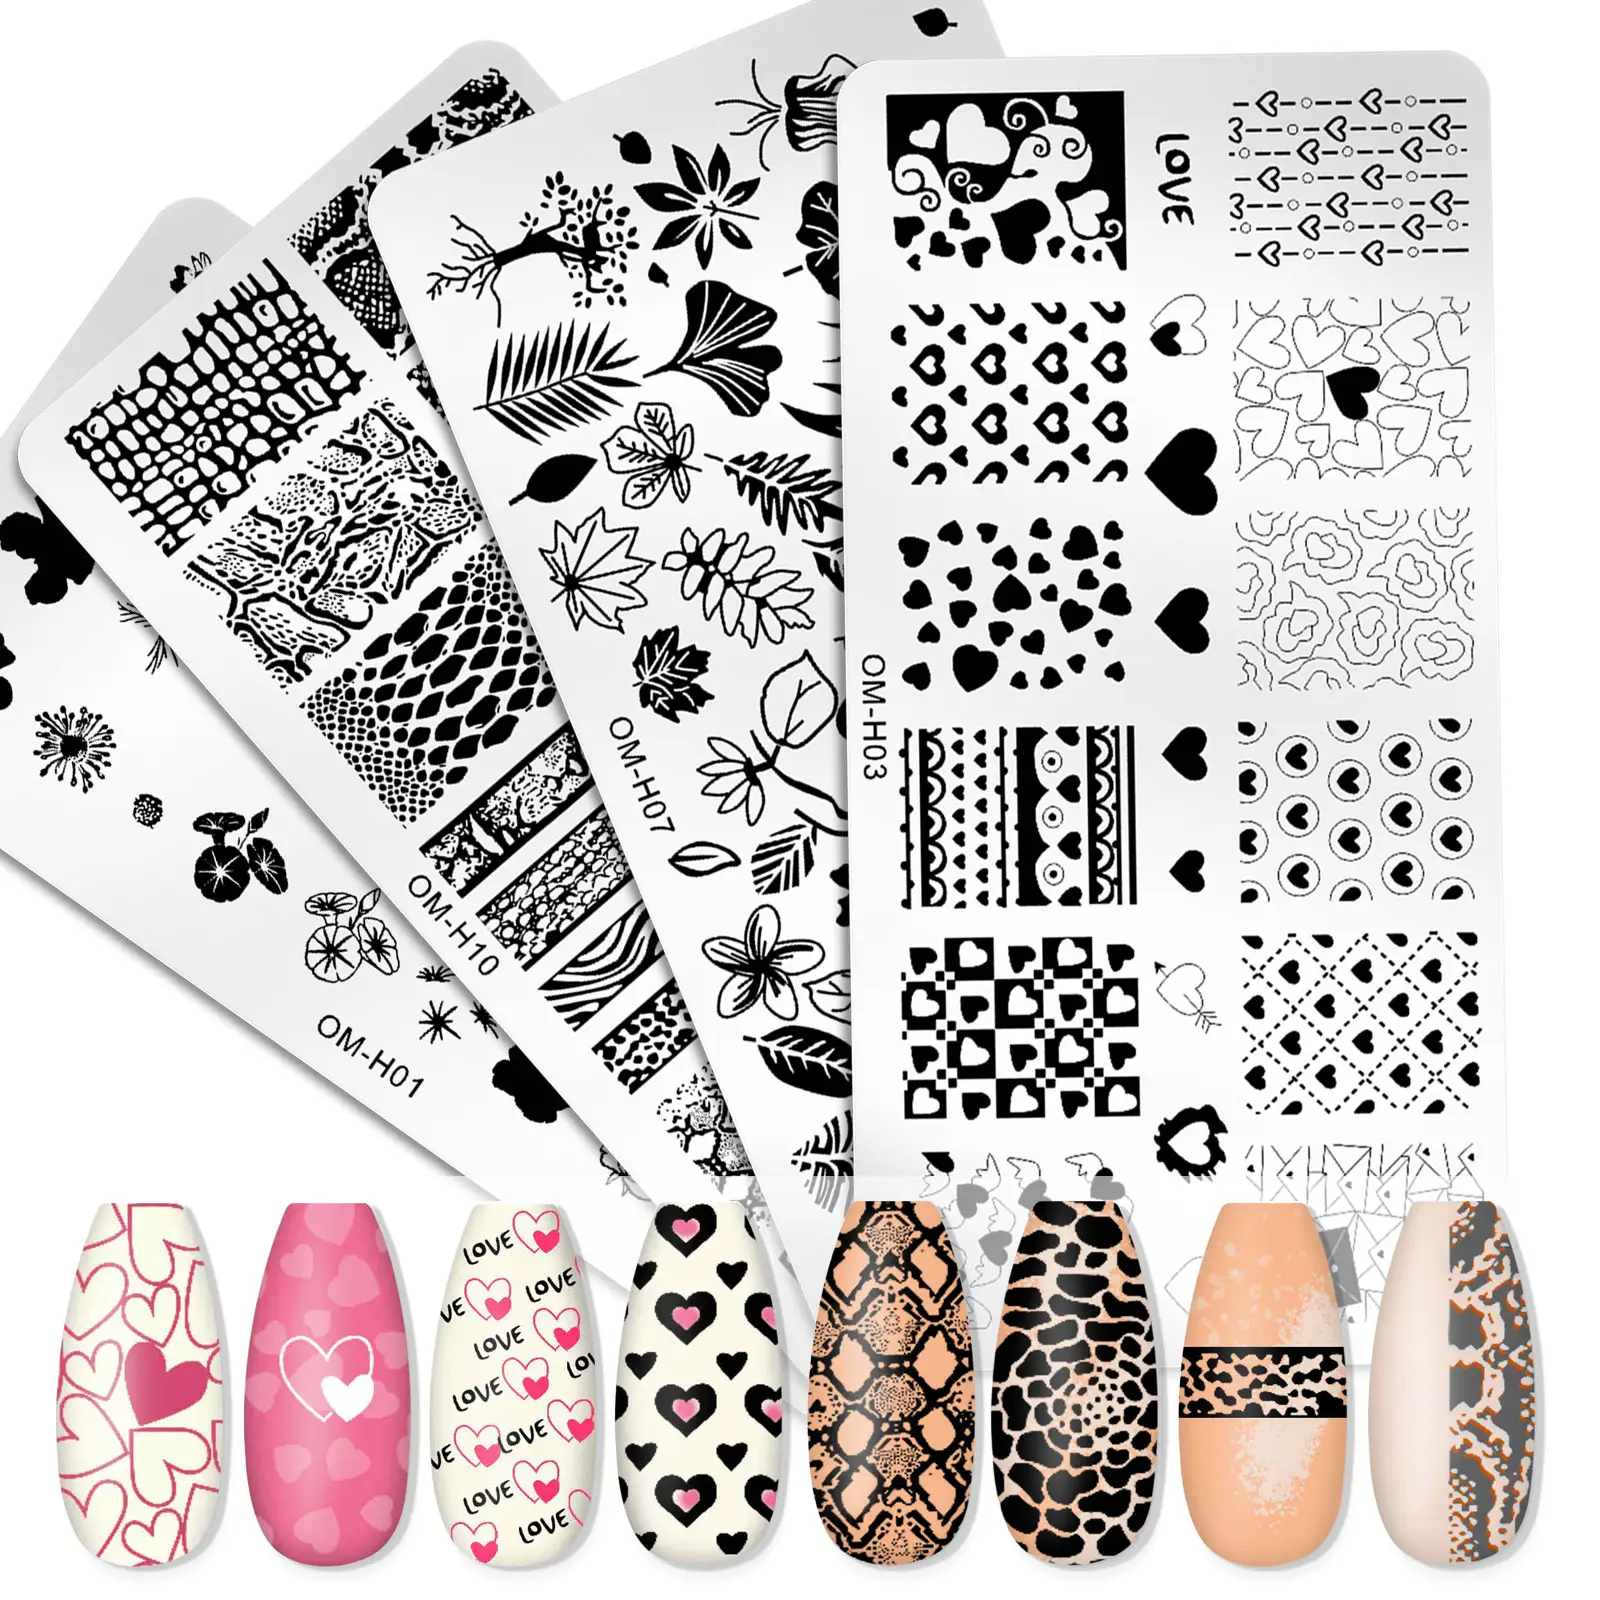 Professional Custom Stainless Steel Stamp Plate Tool Image Kit Template Oem Polish Nail Art Stamping Plates